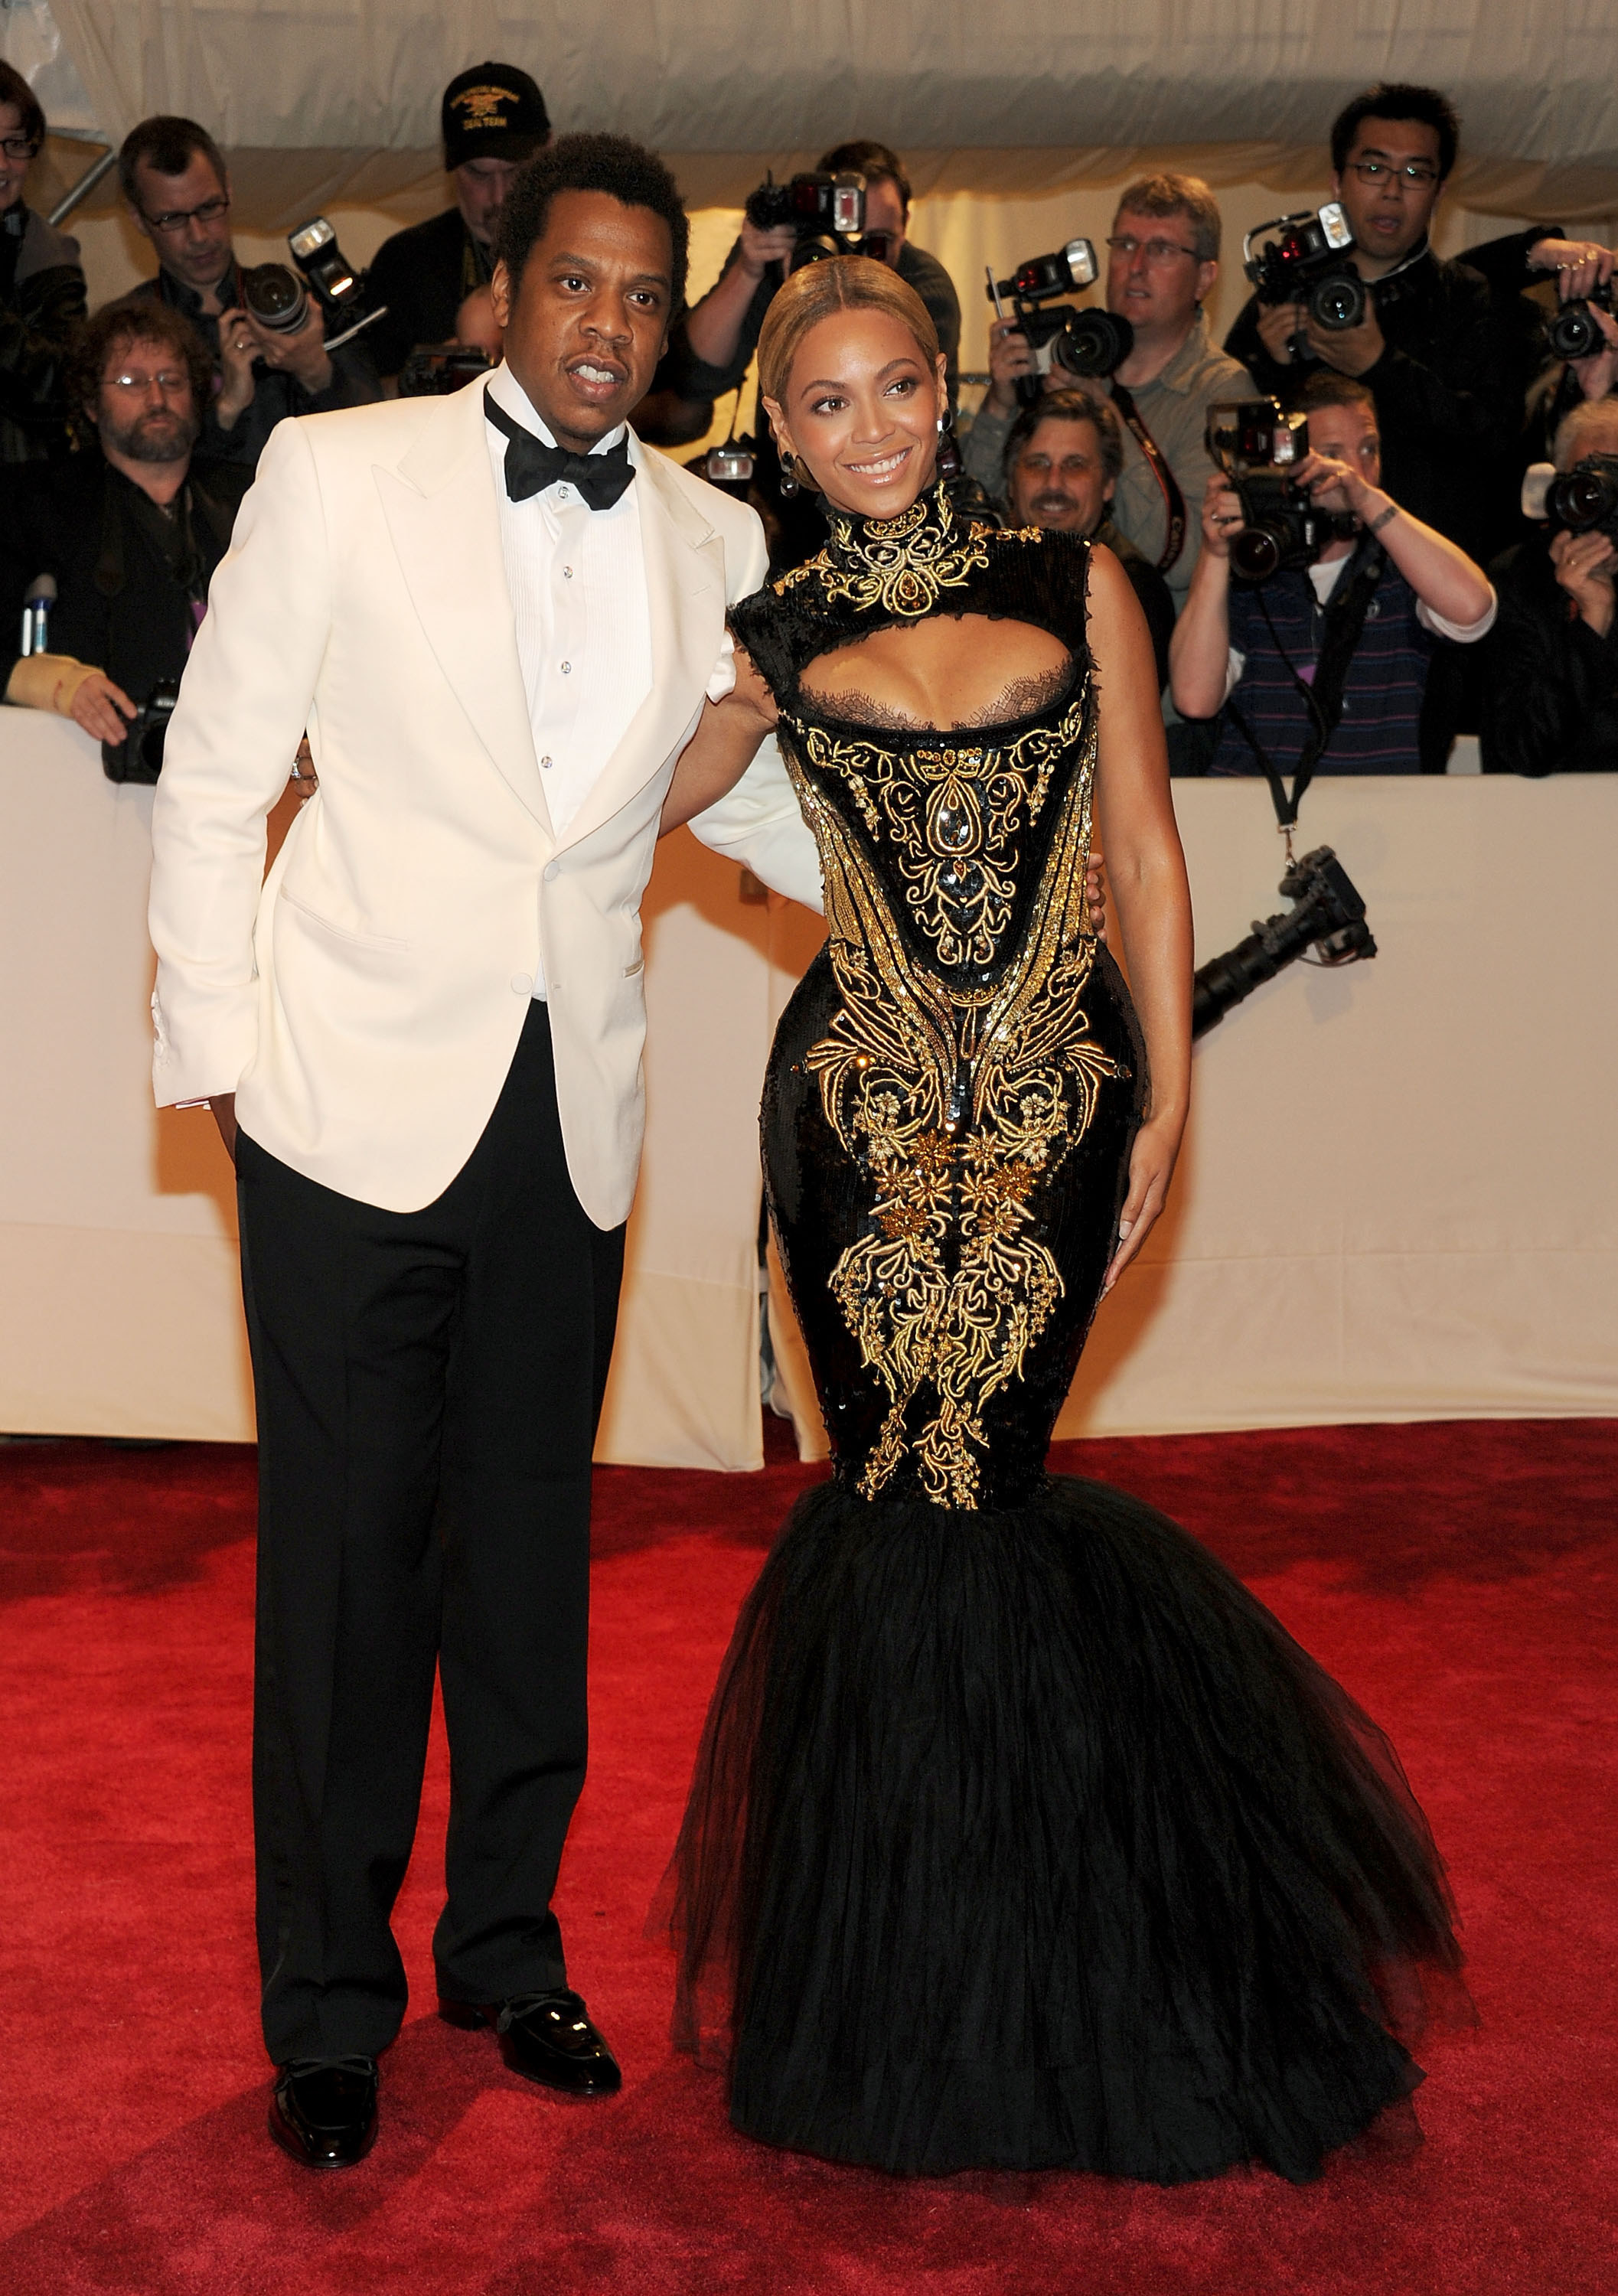 Beyonce and Jay-Z at the Alexander Mcqueen: Savage Beauty Gala at the MOMA in NYC